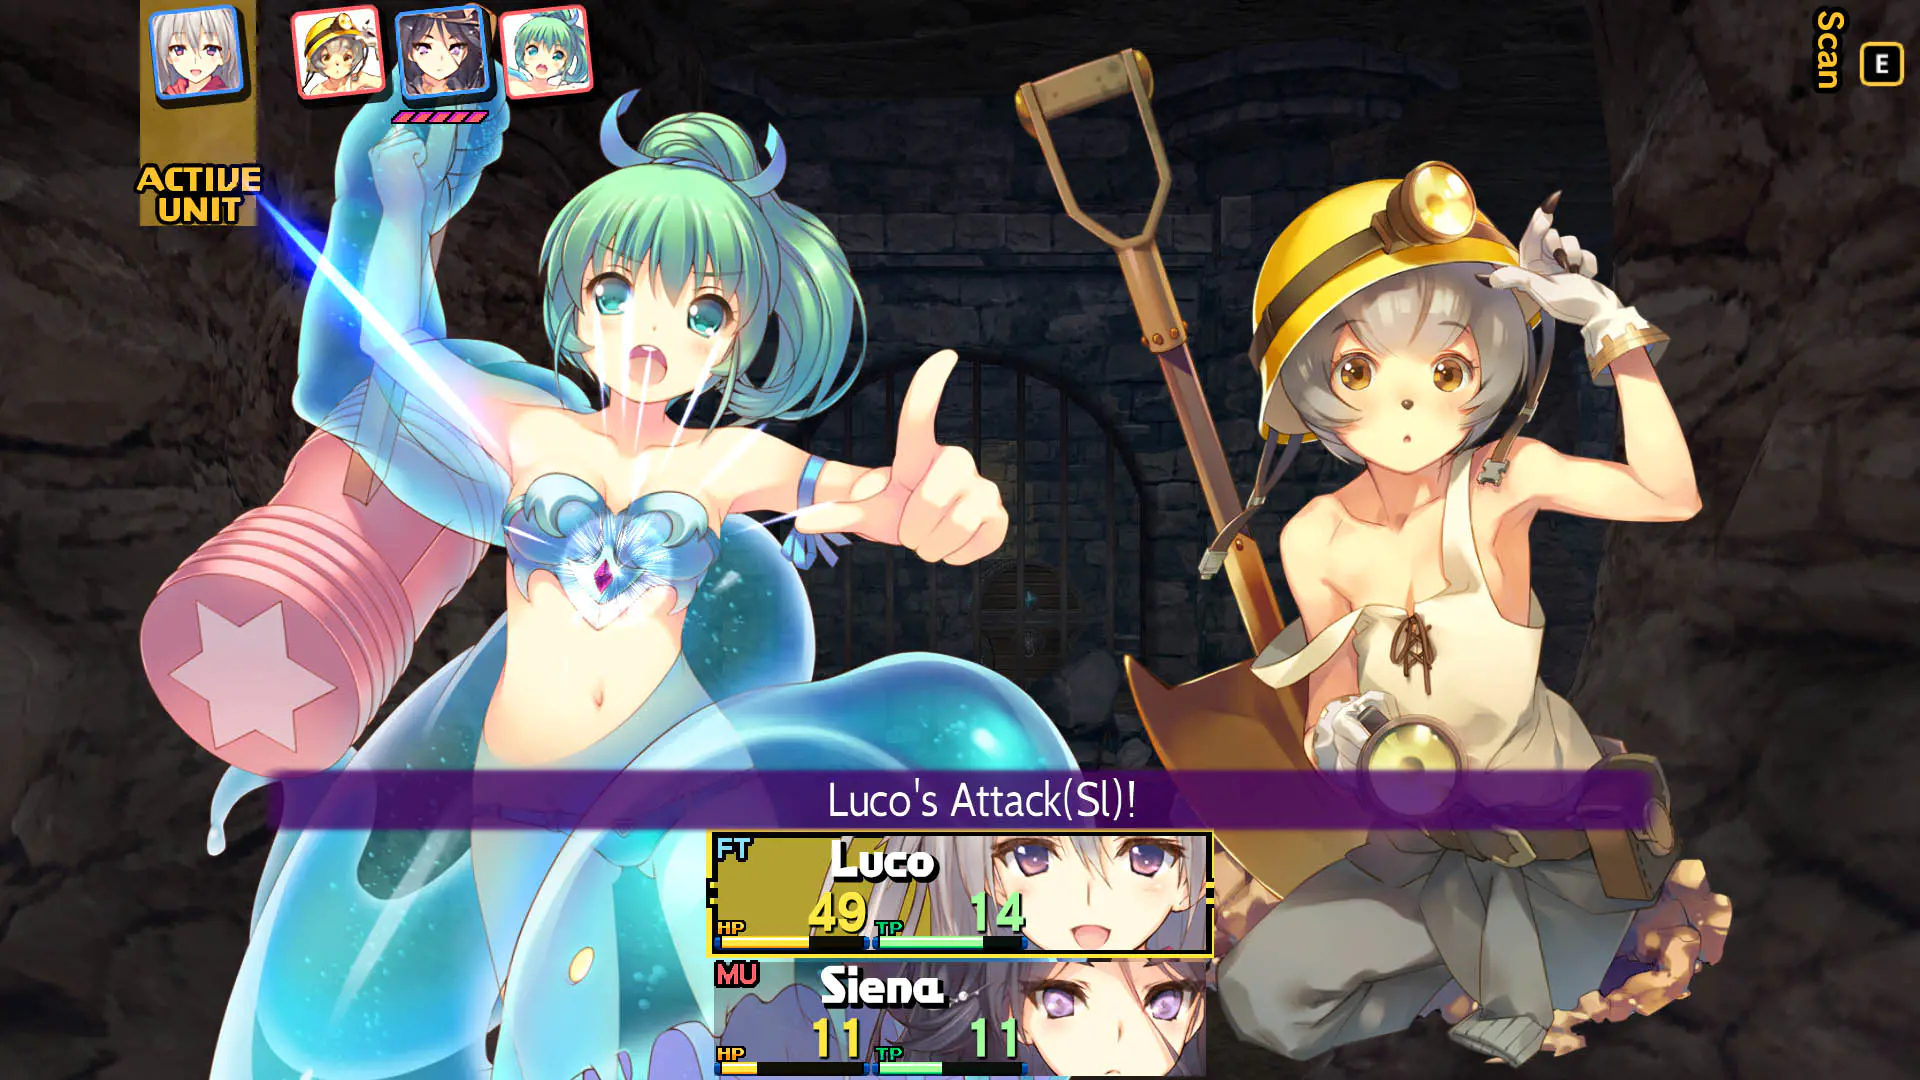 A screenshot of Dungeon Travelers 2, showcasing some of the character models.